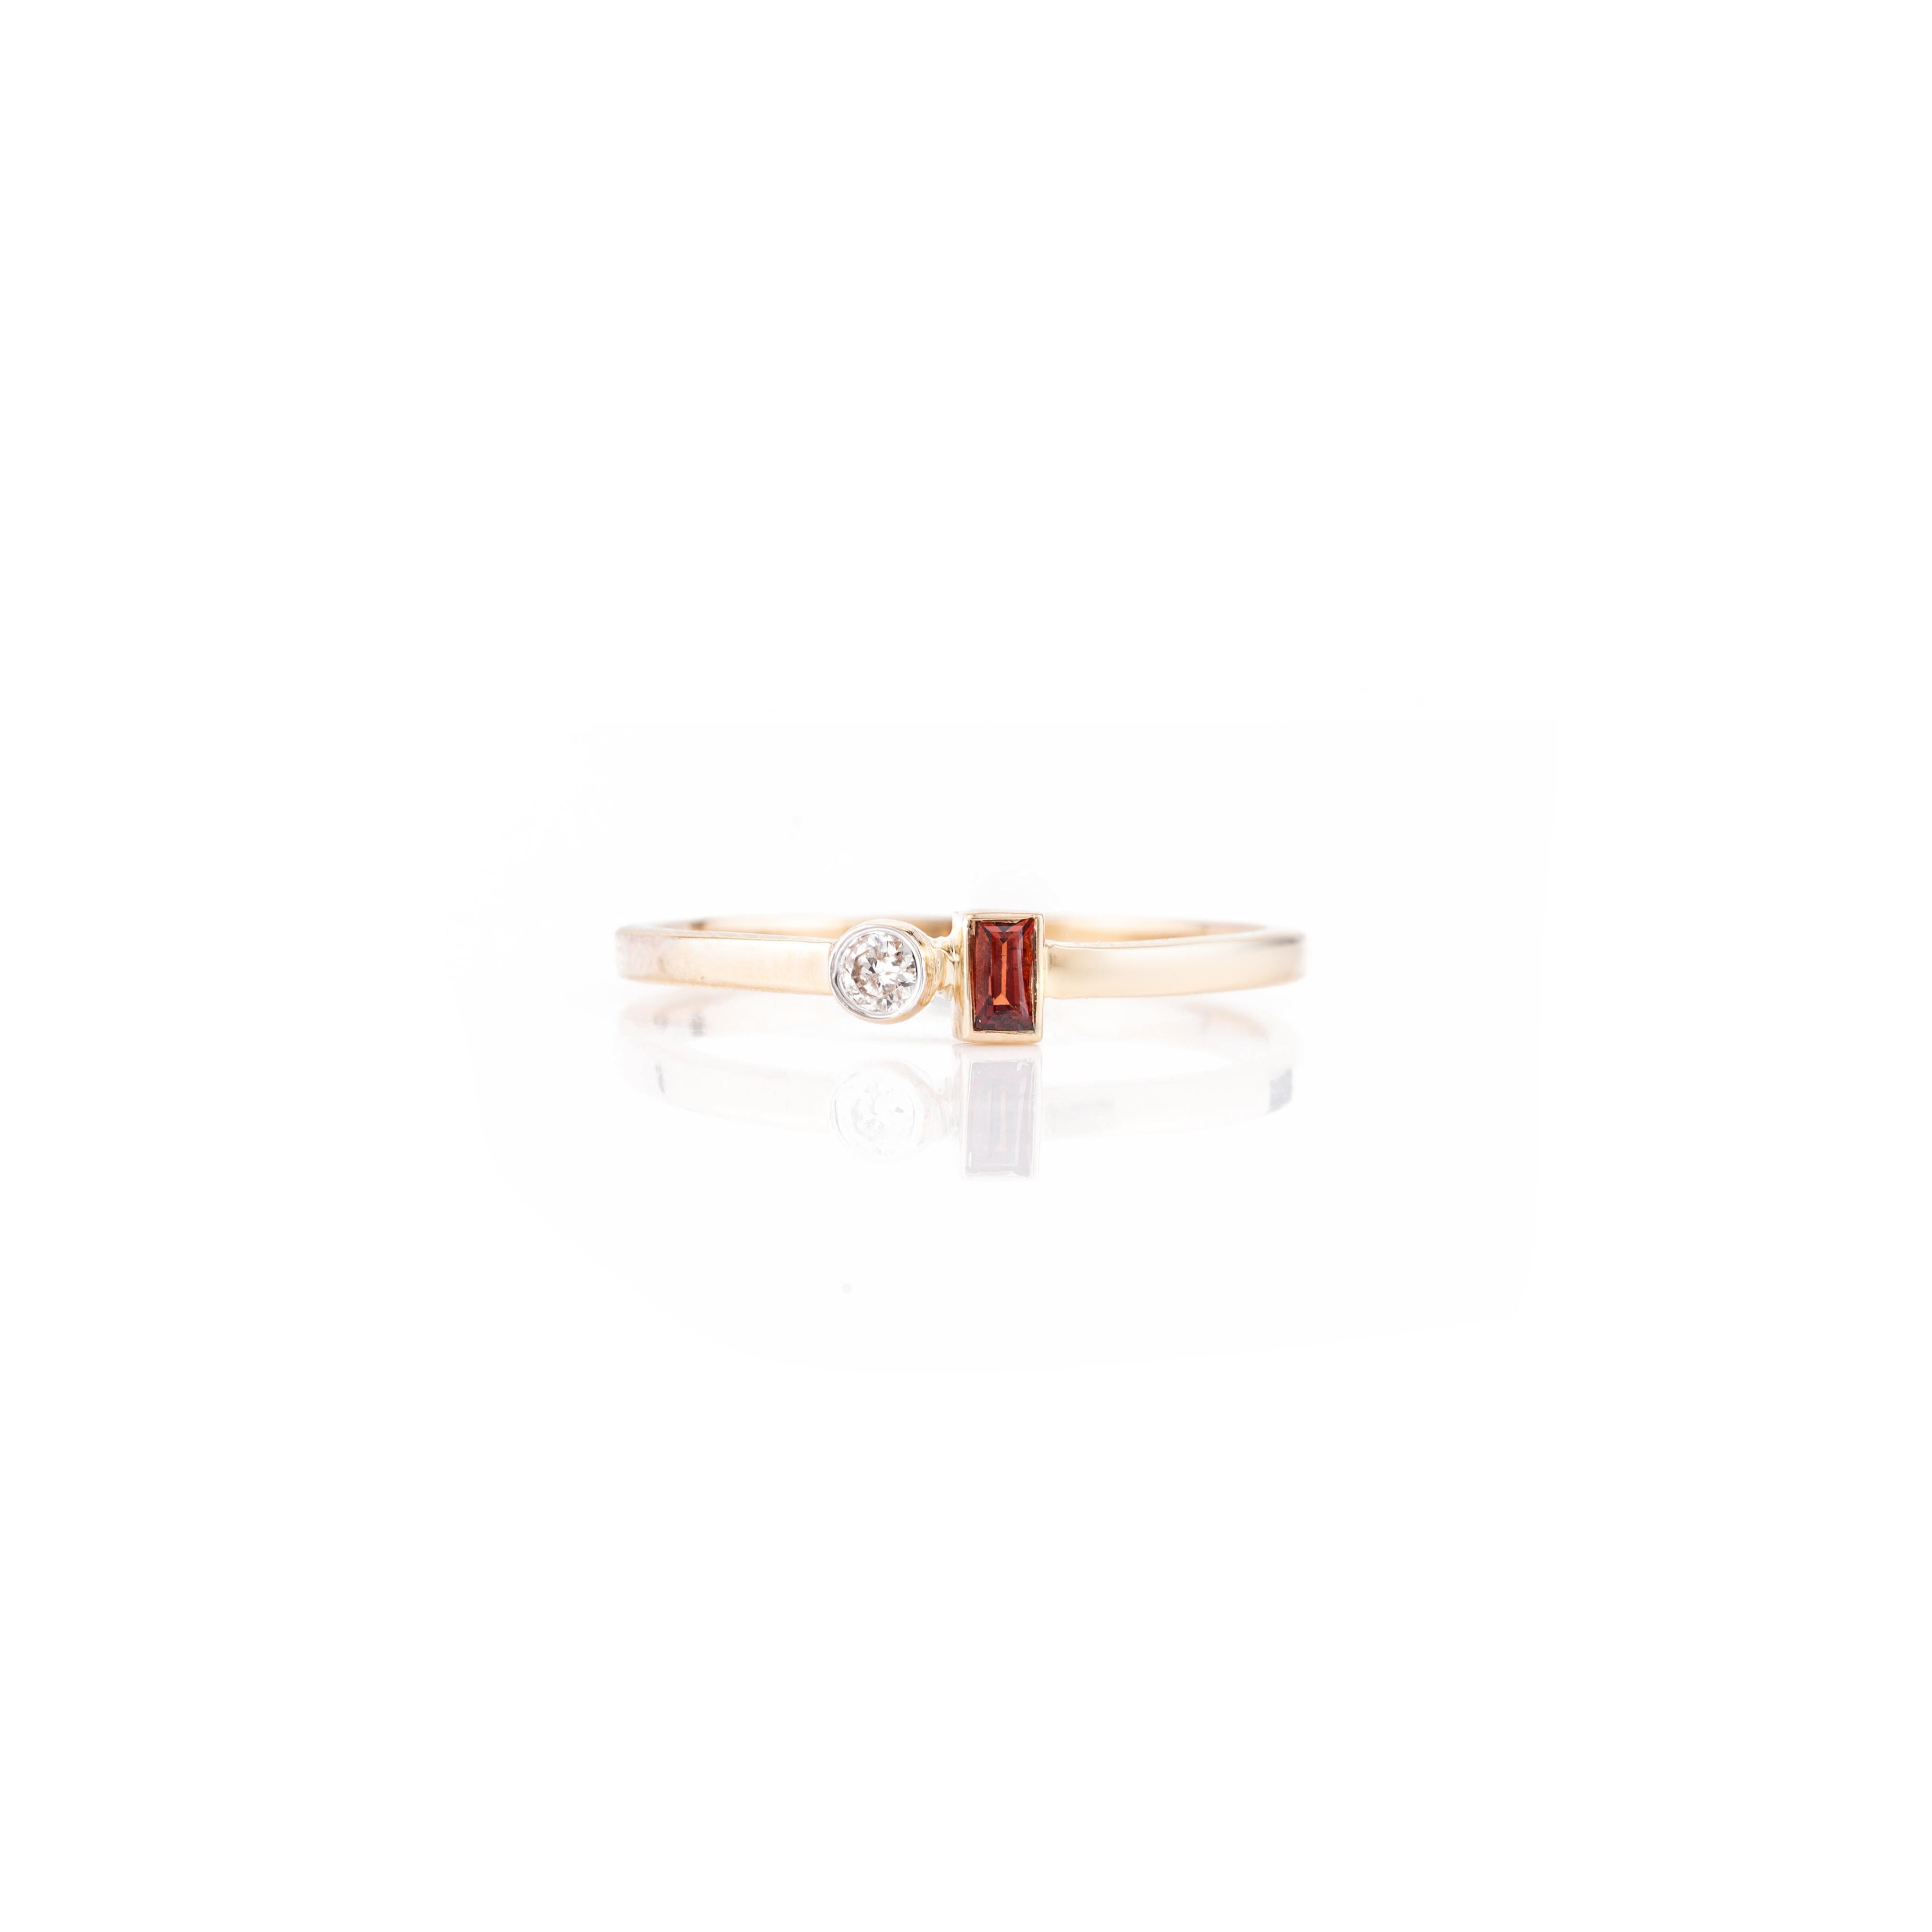 For Sale:  Handmade Tiny 14k Solid Yellow Gold Garnet and Diamond Ring for Her 3